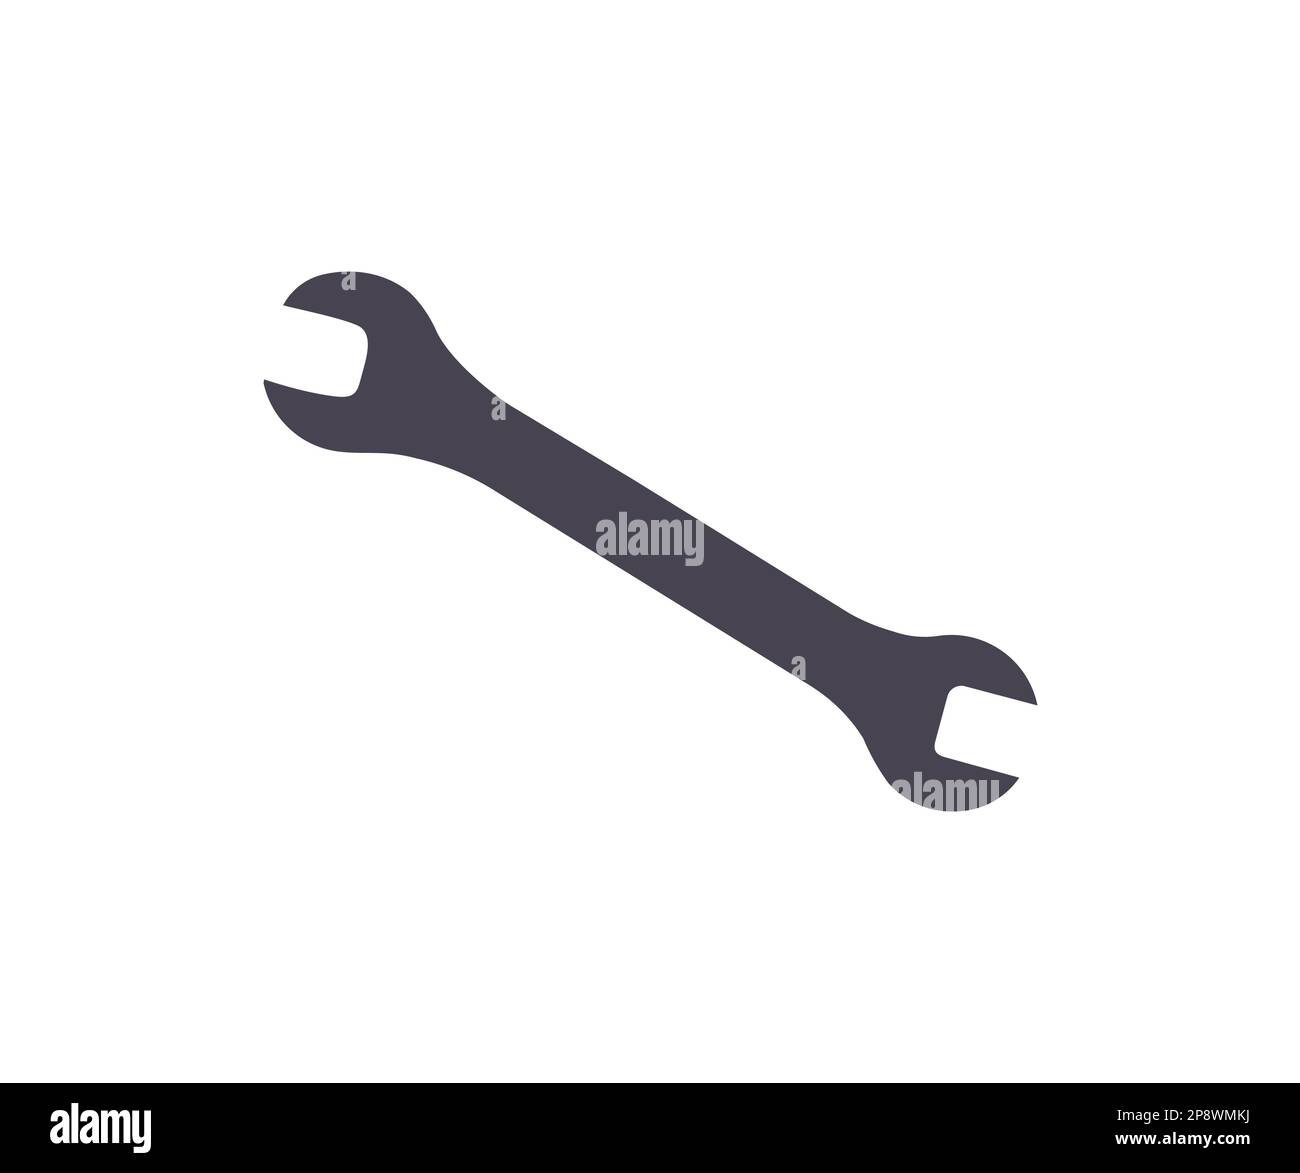 Wrench icon. Wrench or spanner repair tool silhouette. Diy tool for building improvement and construction, maintenance work of builders, handyman. Stock Vector